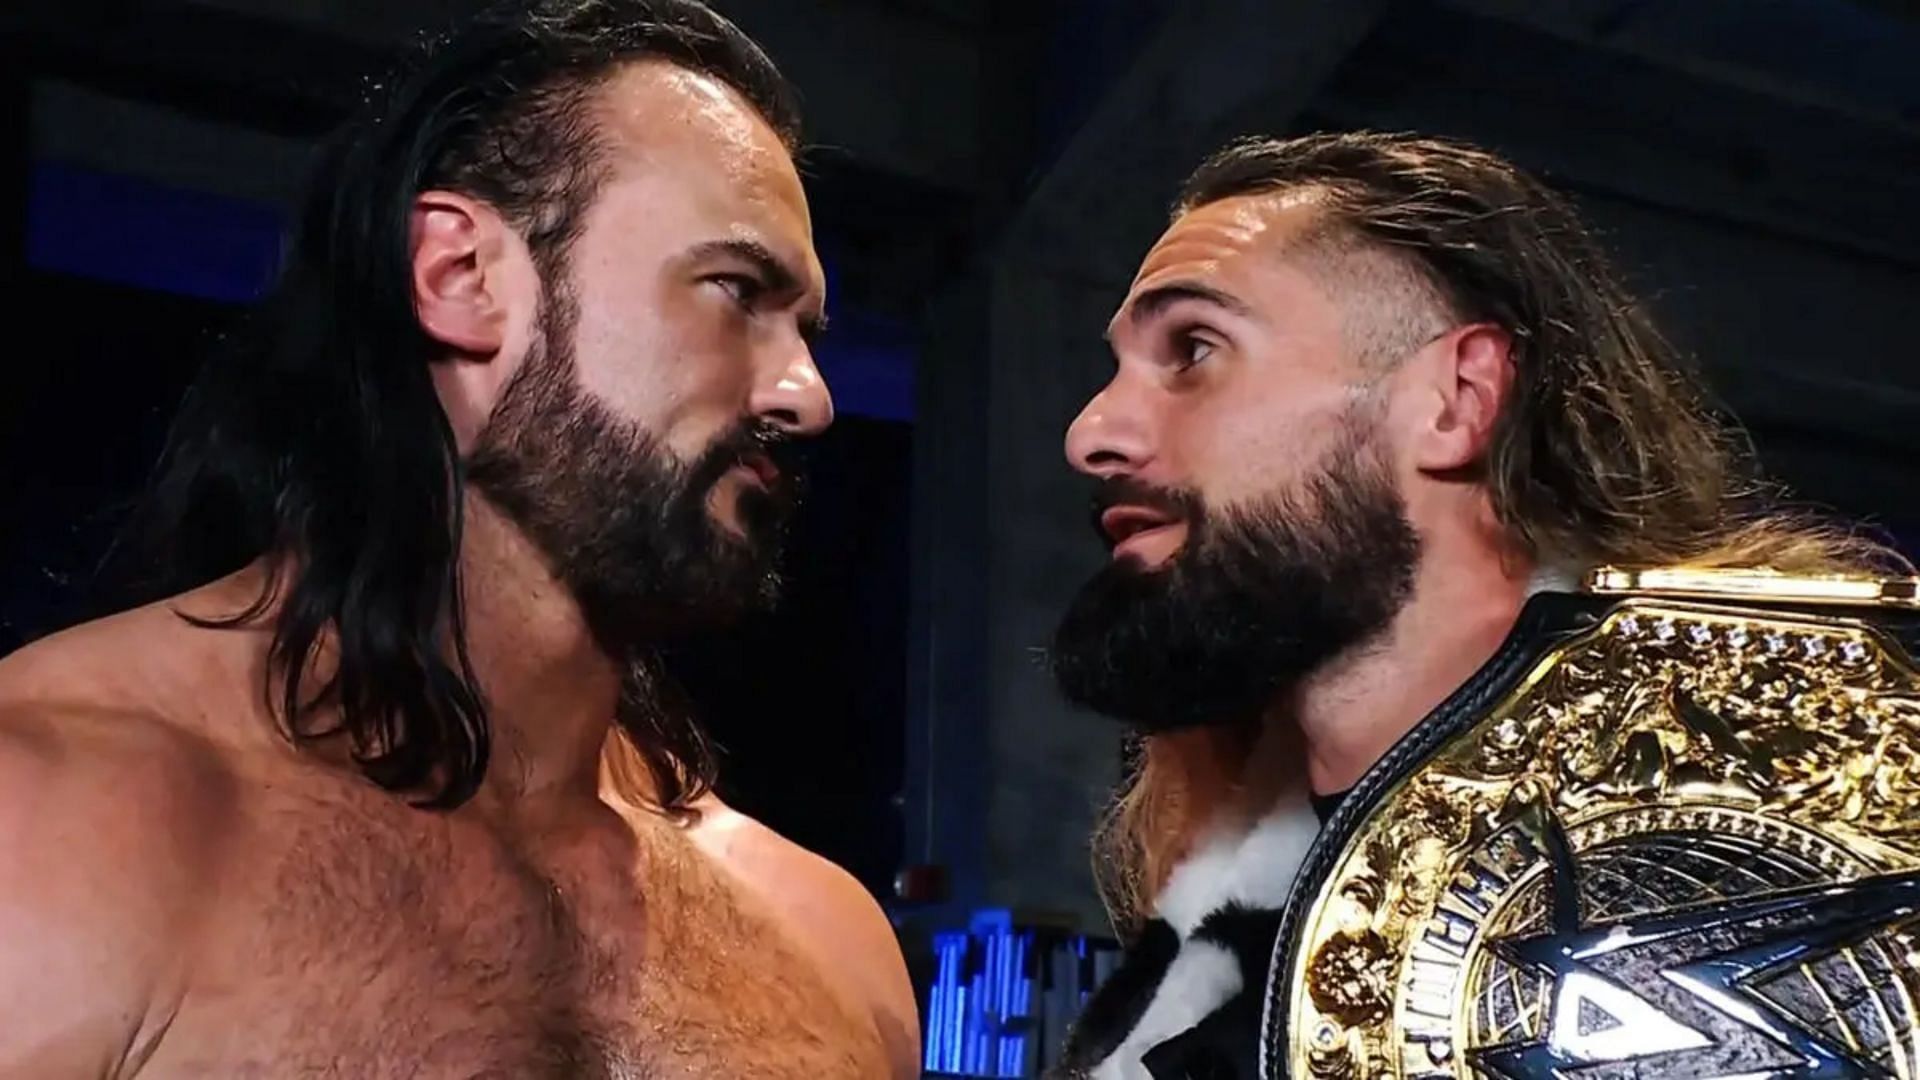 Drew McIntyre and Seth Rollins will square off at WWE Crown Jewel